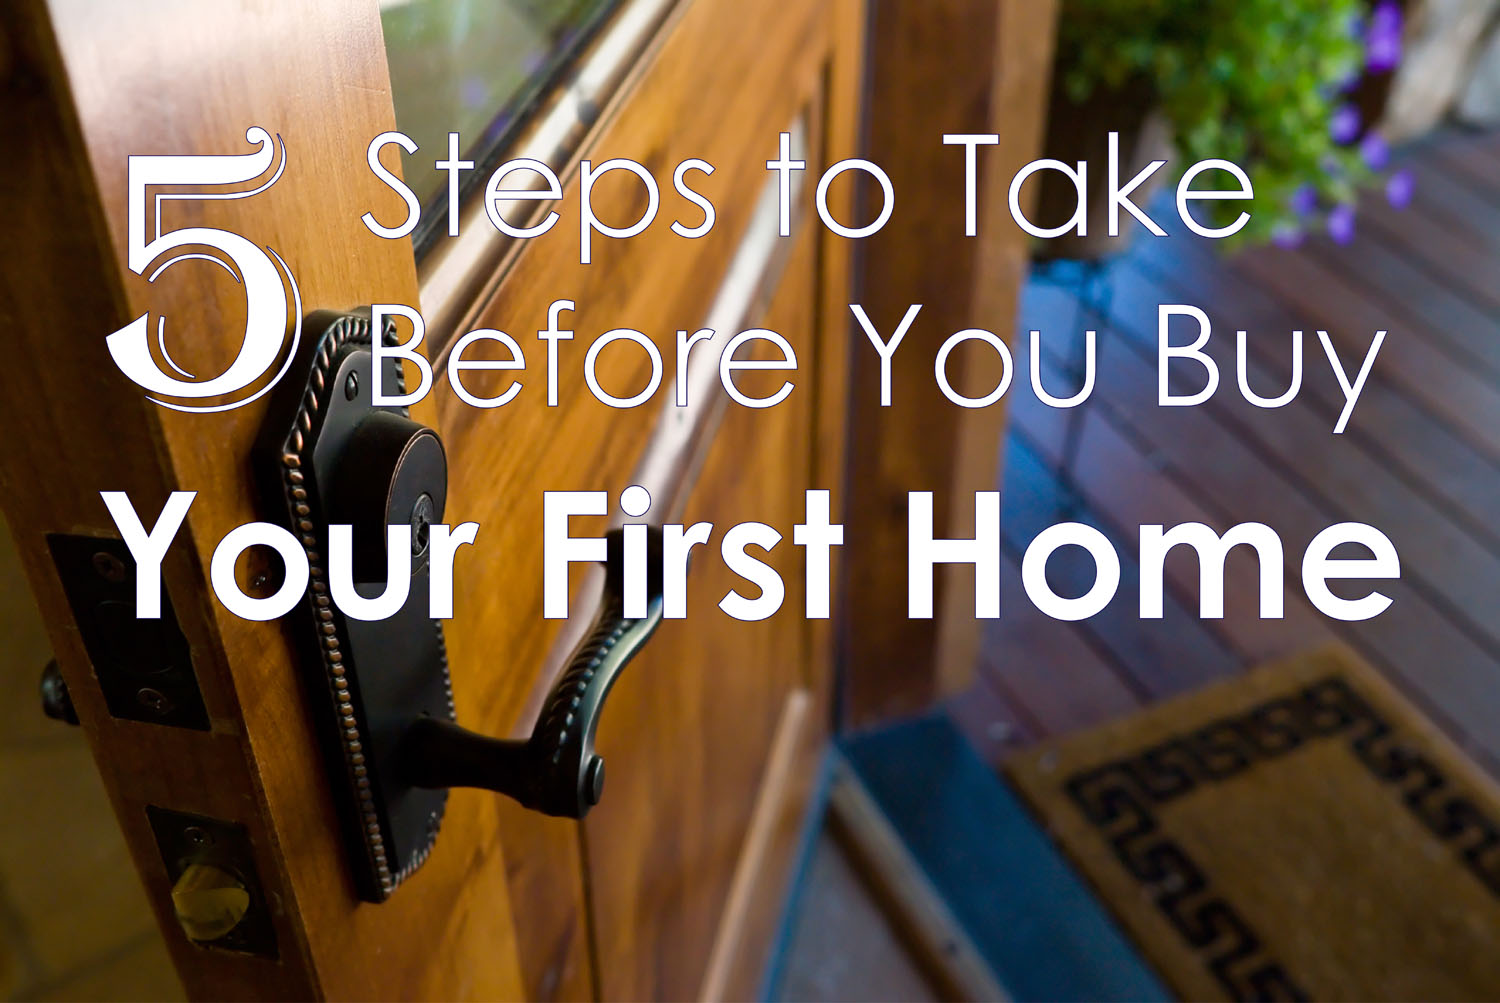 Five Steps to Help You Buy Your First Home